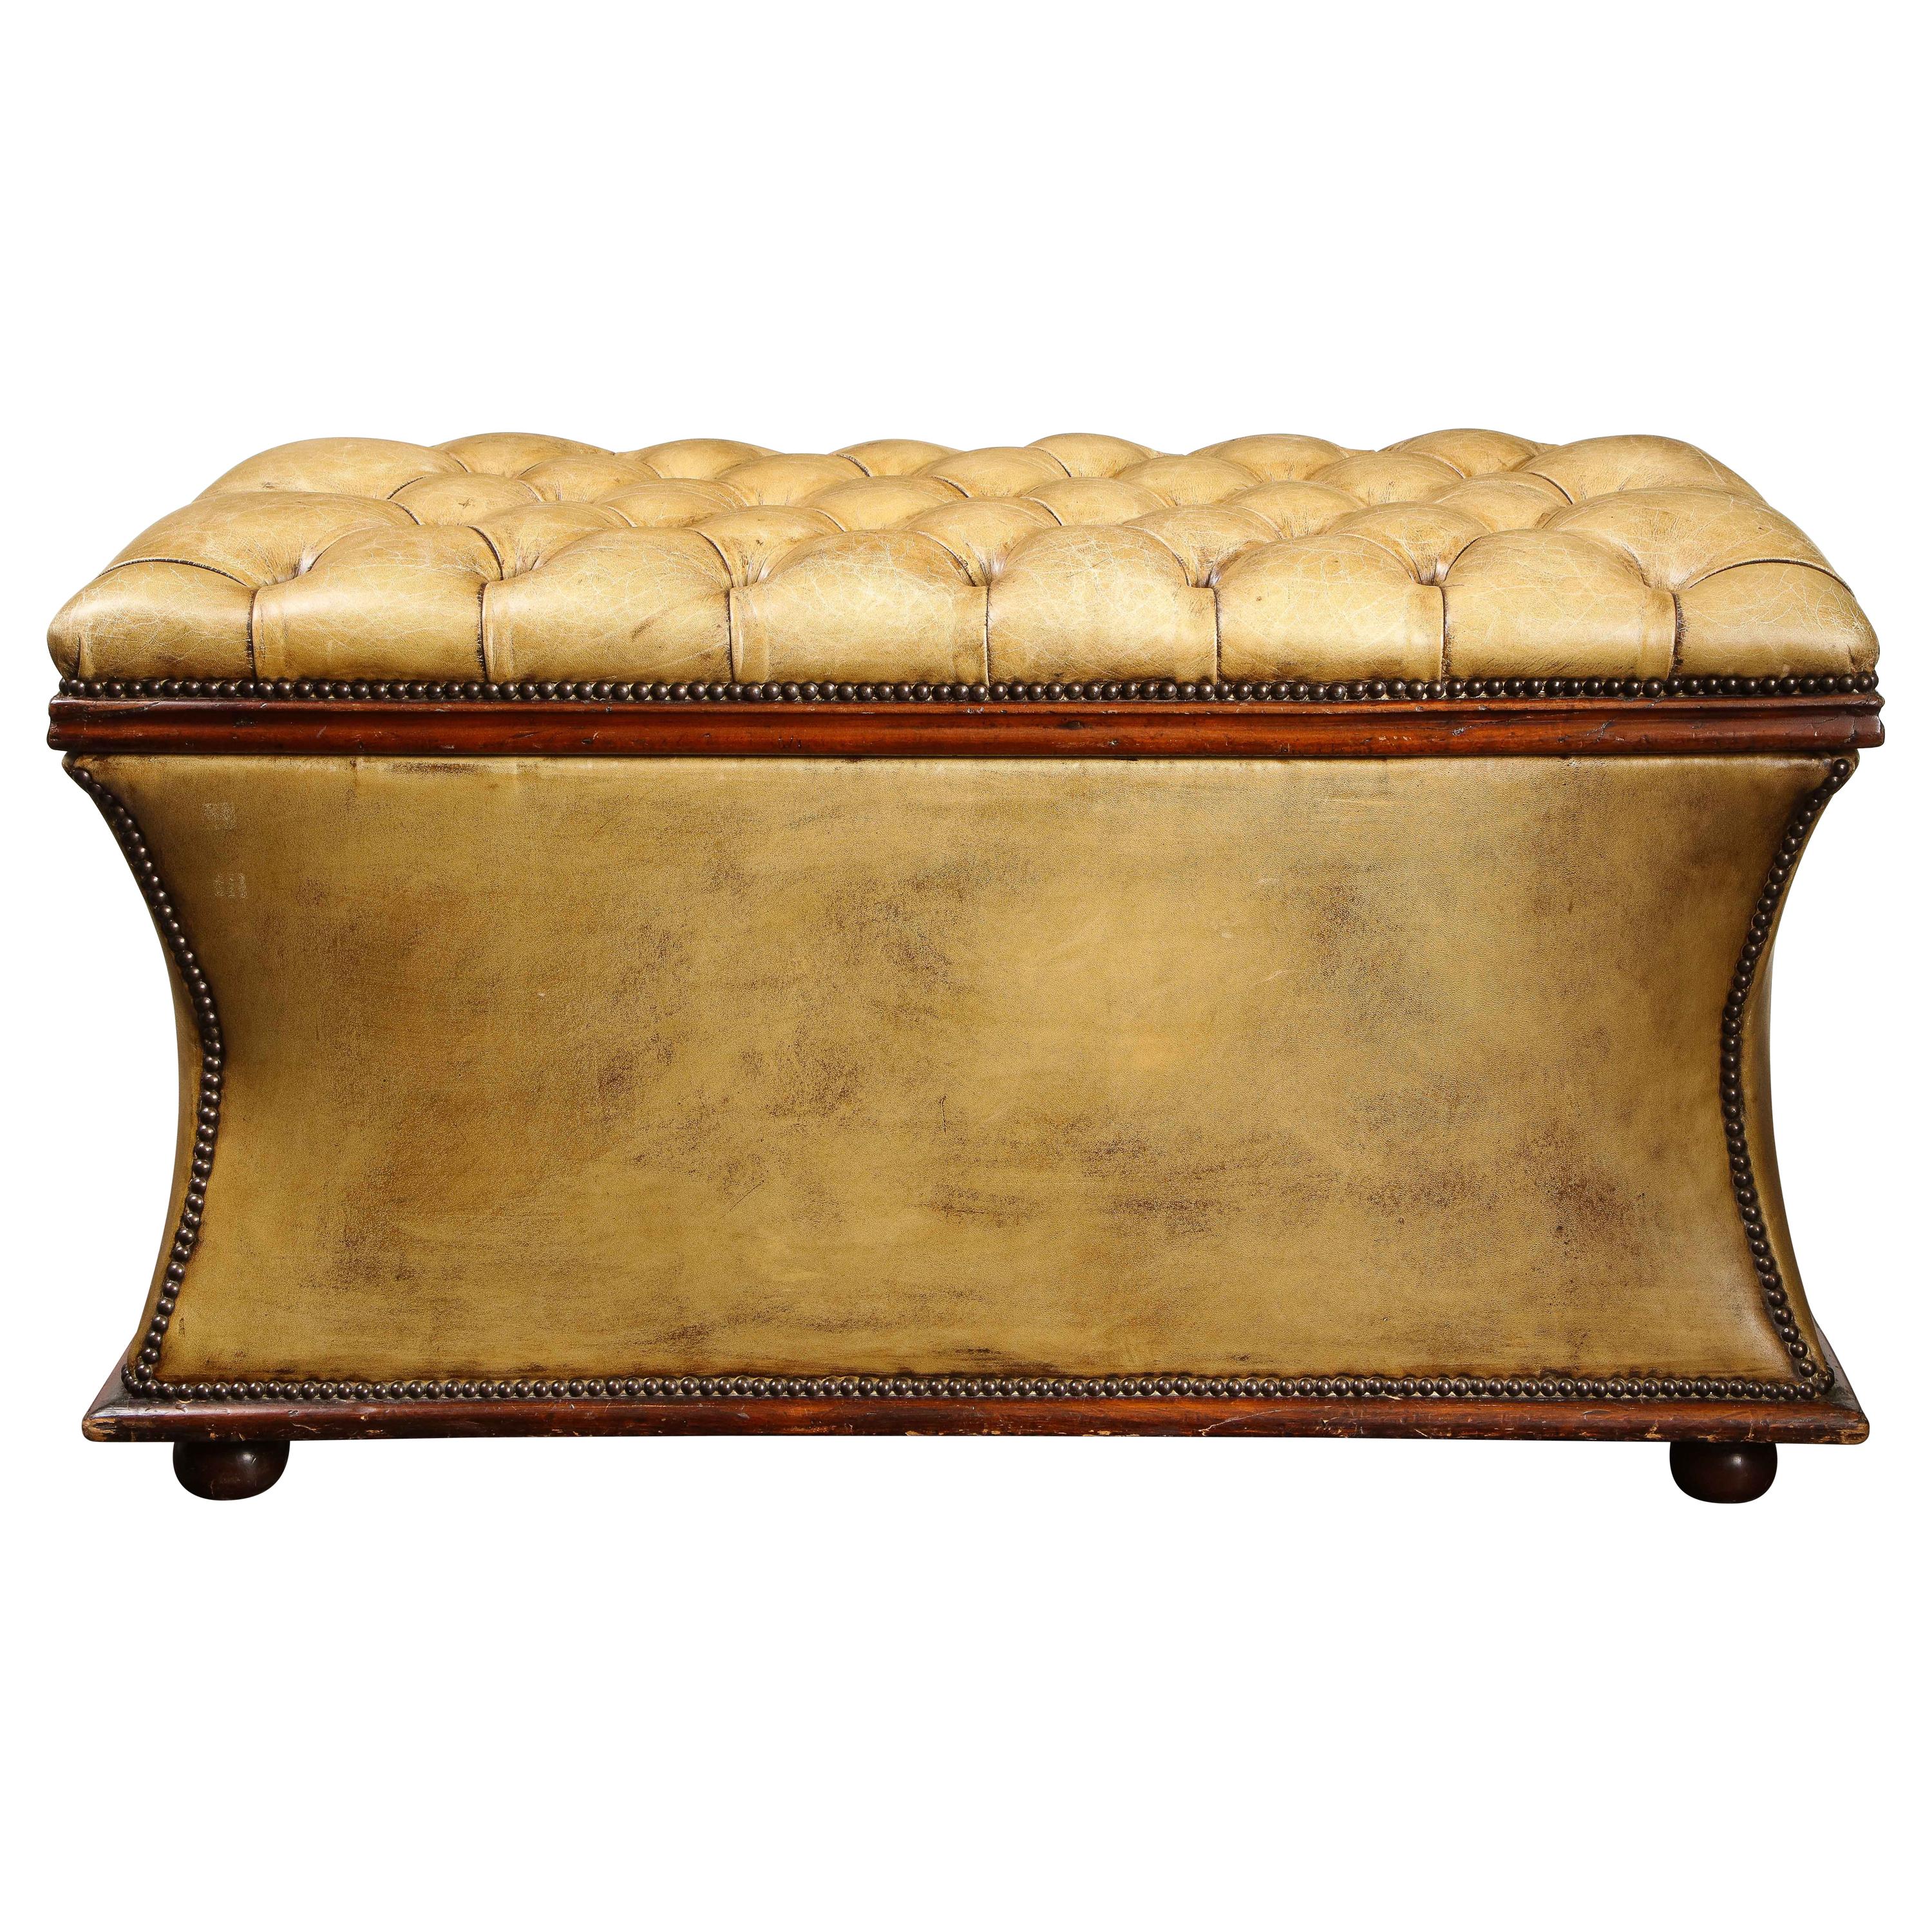 Distressed Olive Leather Flip Top Ottoman